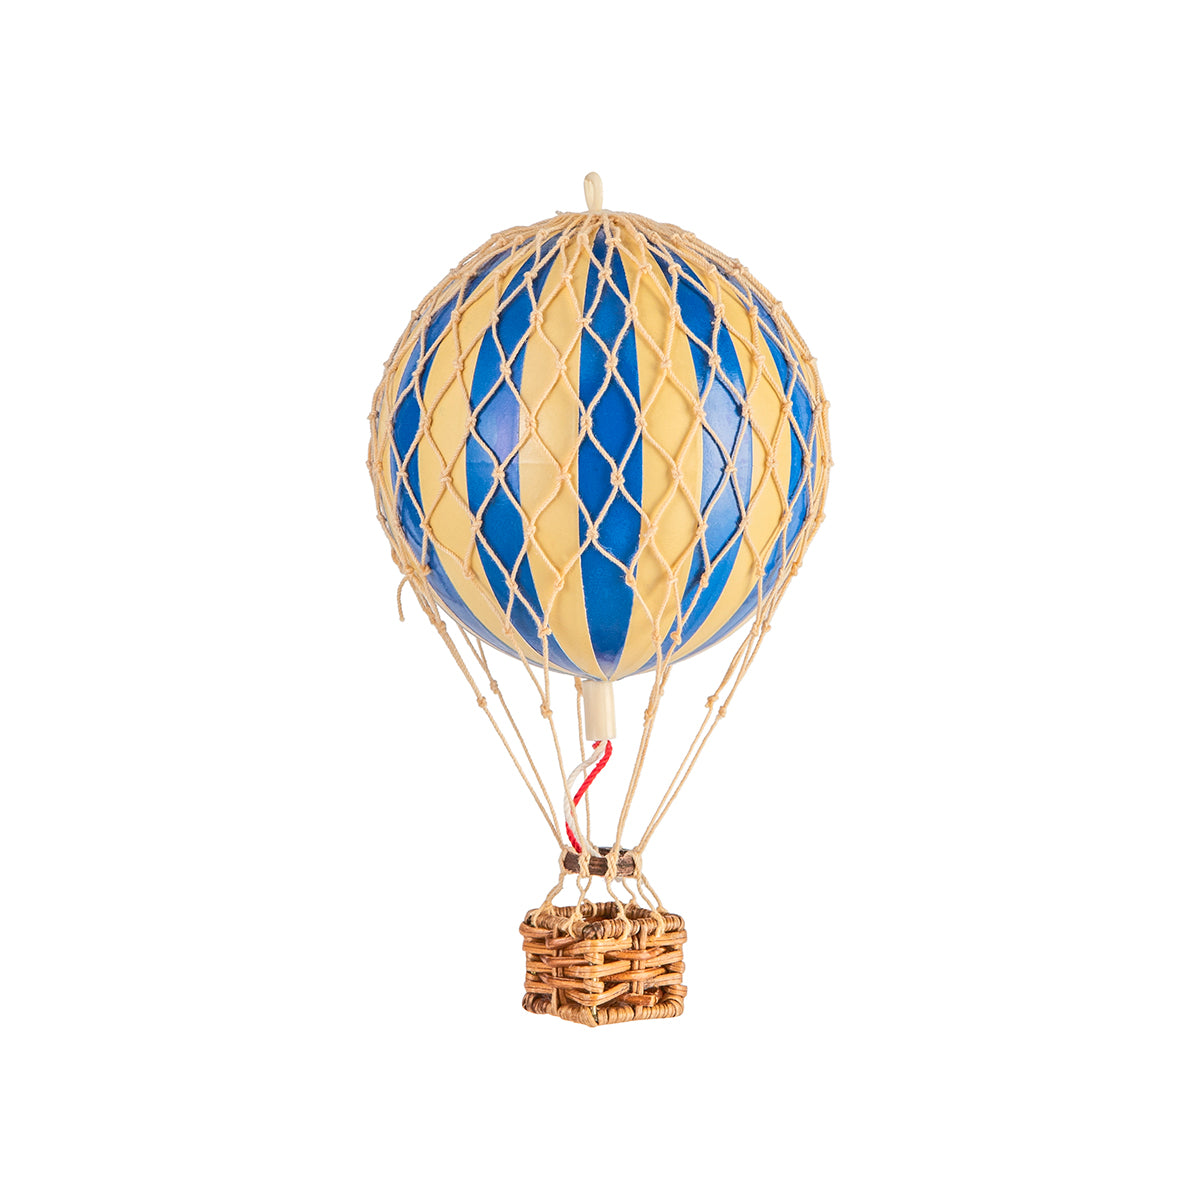 A Wonderen Extra Small Hot Air Balloon - Floating The Skies adventure on a white background.